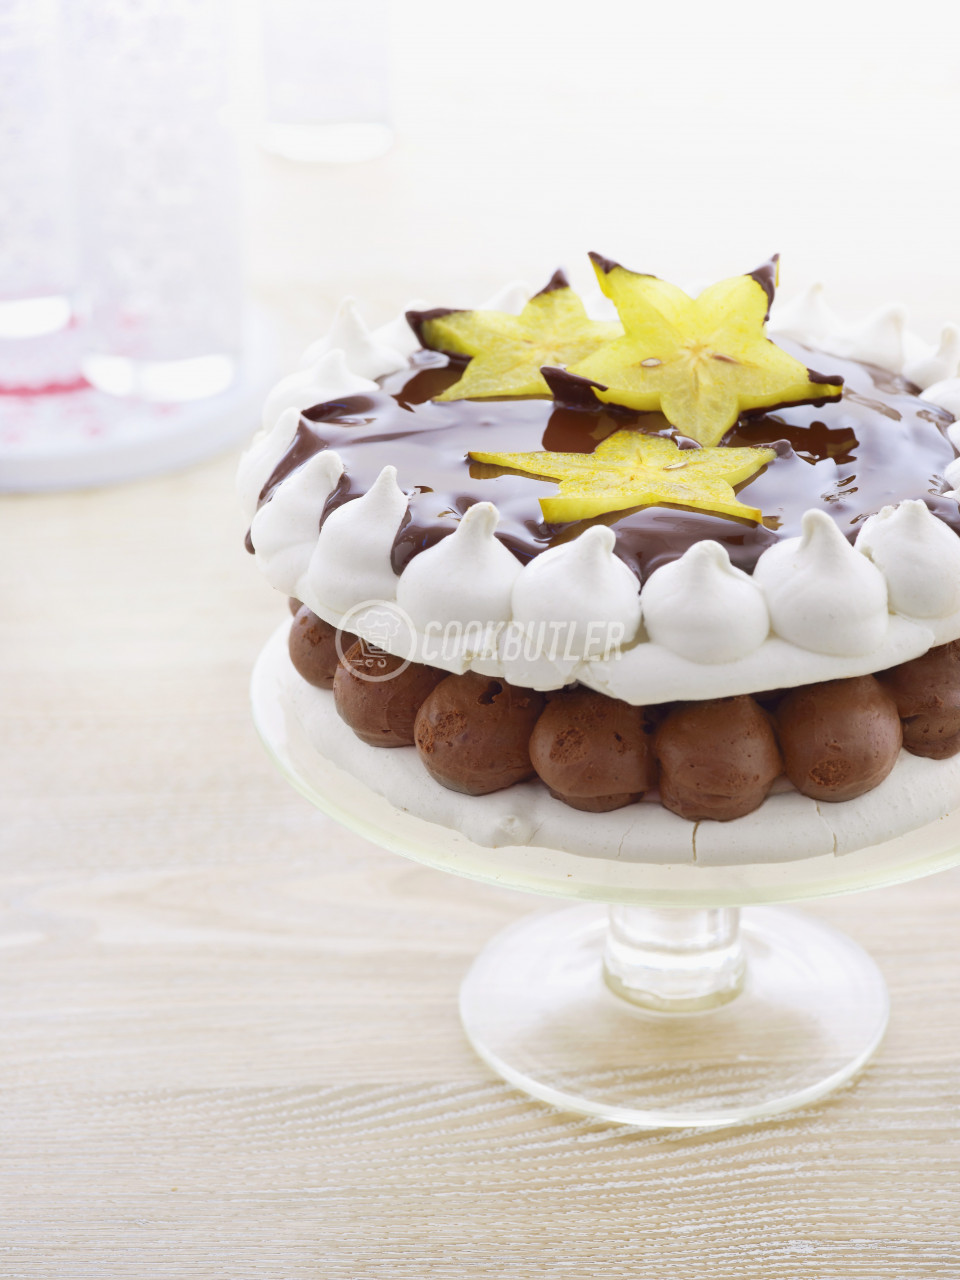 Gluten-free Pavlova with chocolate and star fruit for Christmas | preview